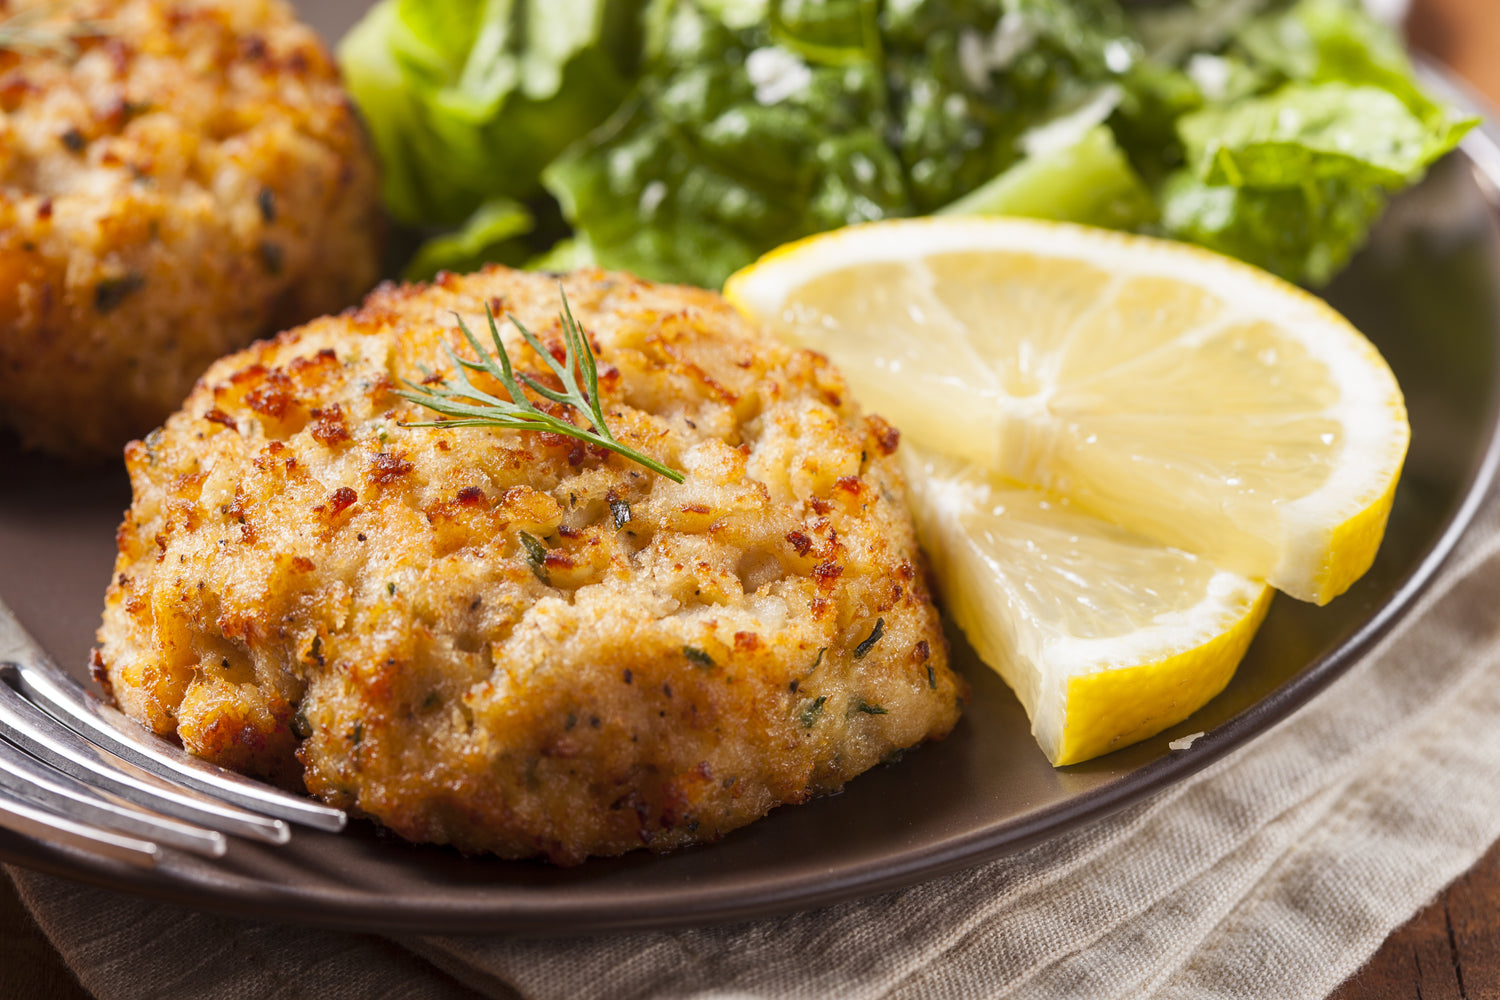 Healing Meals - Crab Cakes with Chopped Vegetable Salad Easy Healthy Recipe